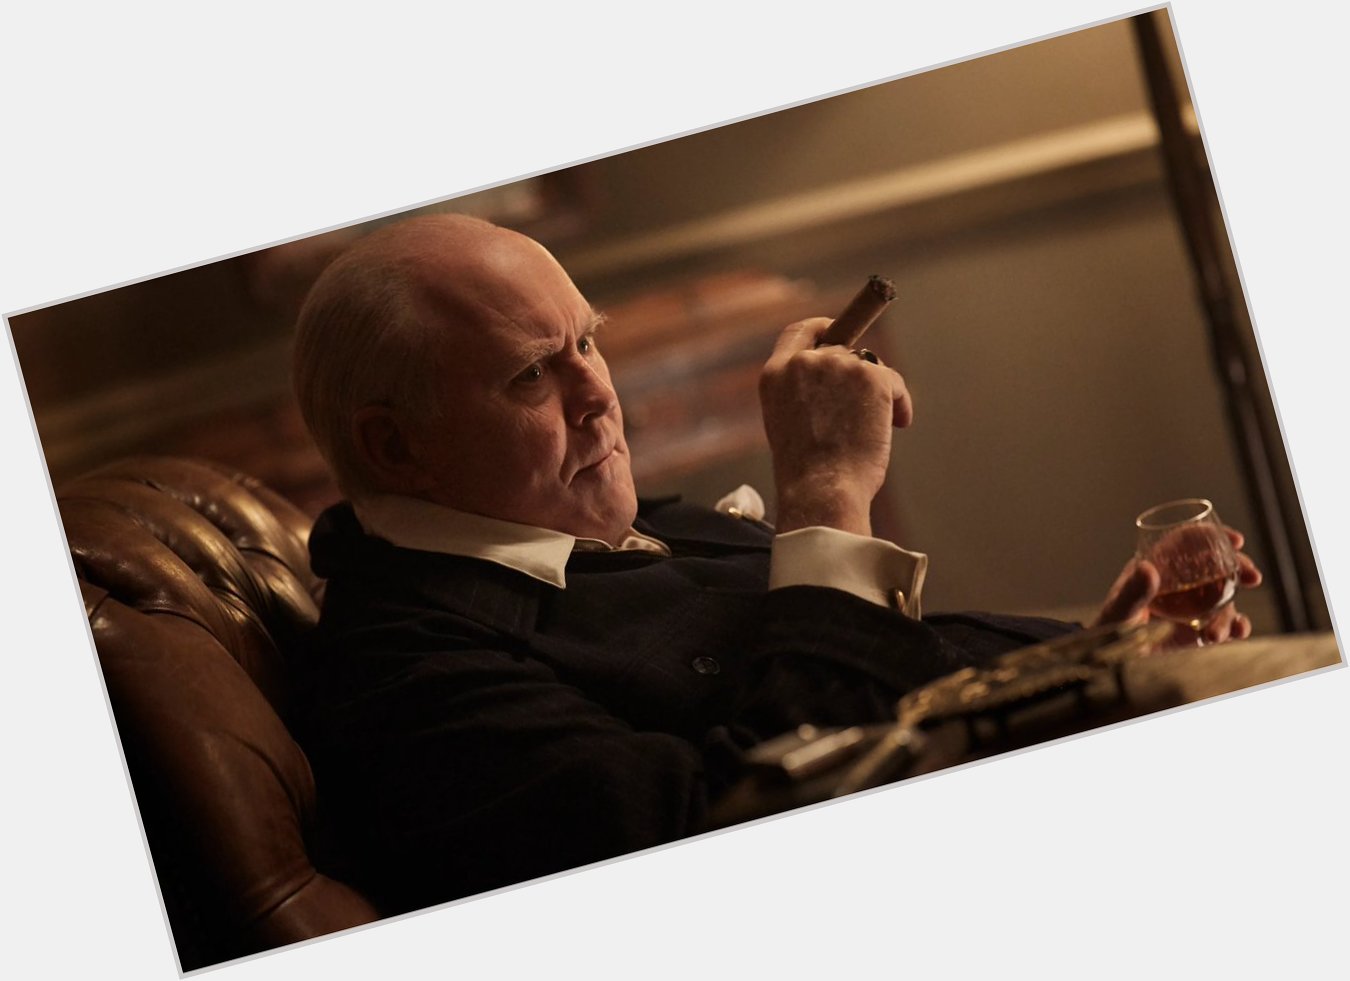 Happy Bday John Lithgow. If you haven t, go out of your way to see his portrayal of Winston Churchill in The Crown. 